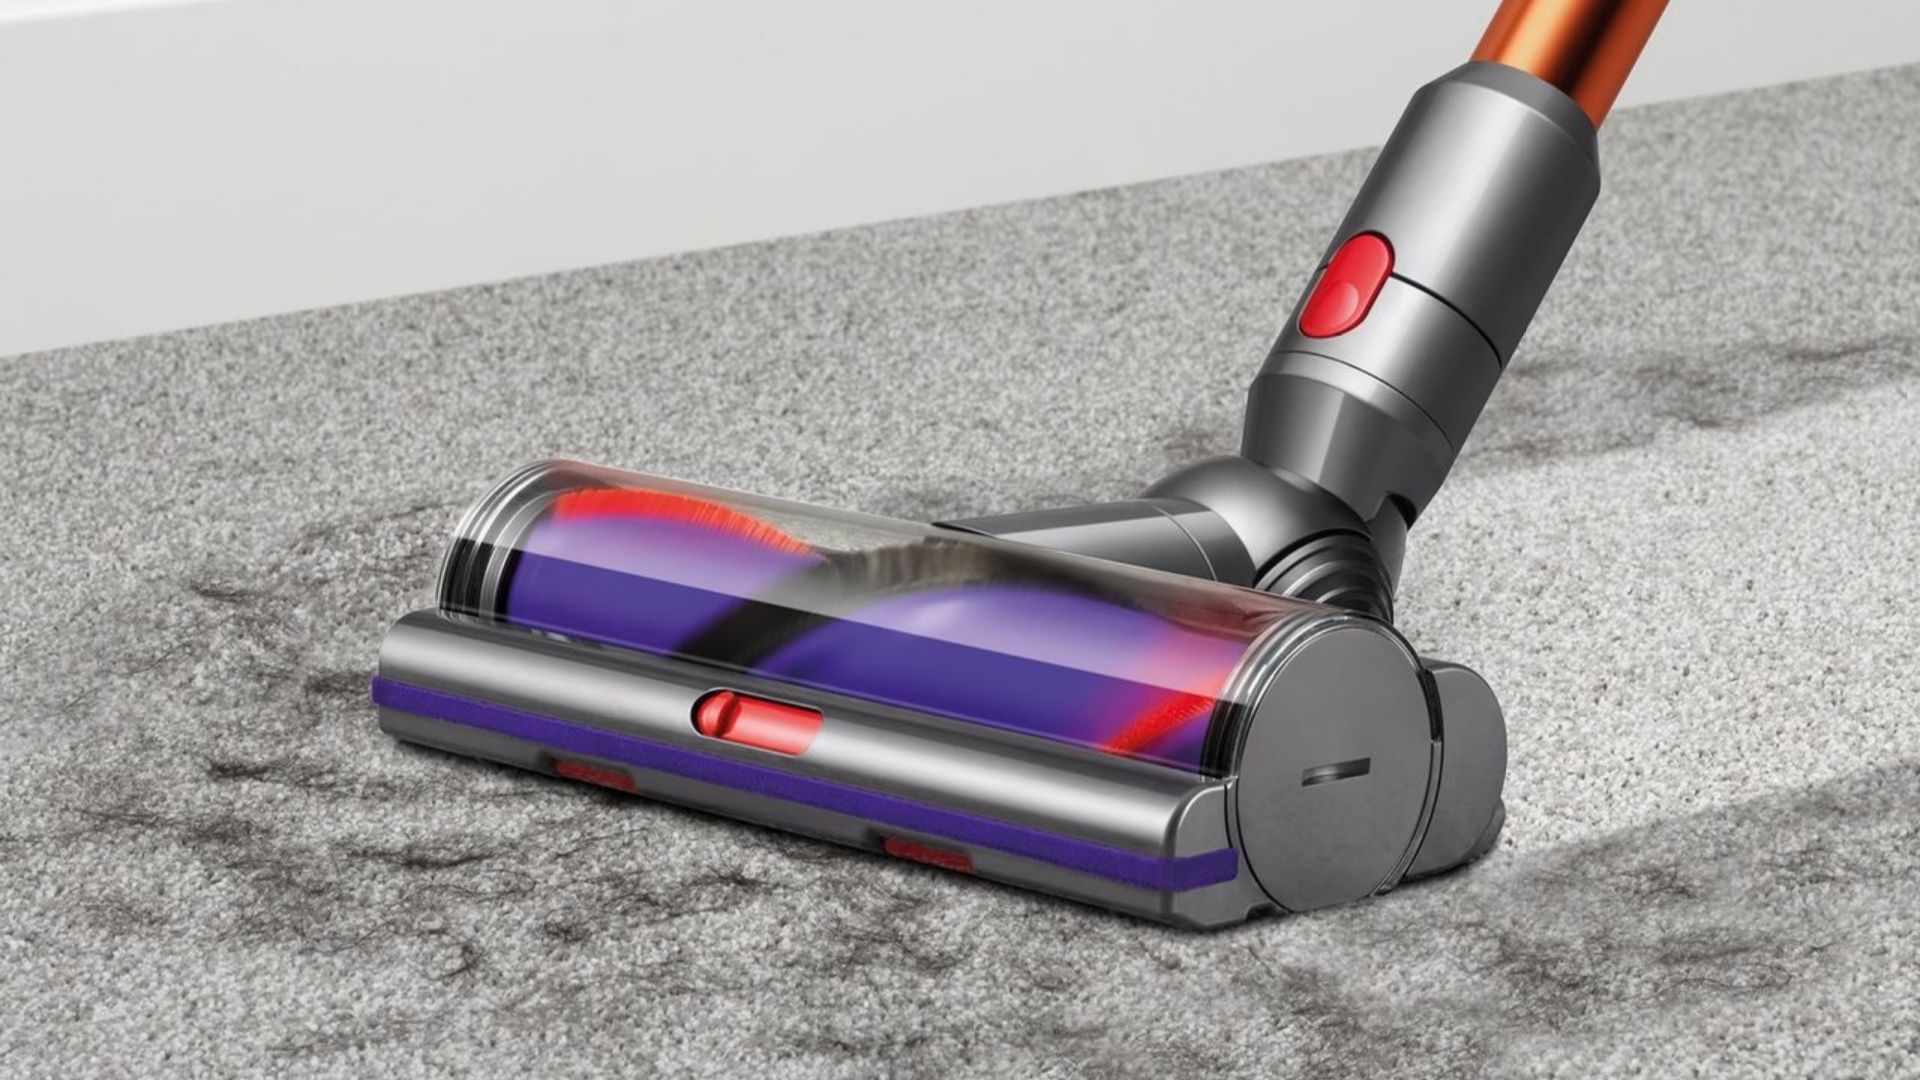 Dyson Cyclone V10 Absolute Unboxing! 